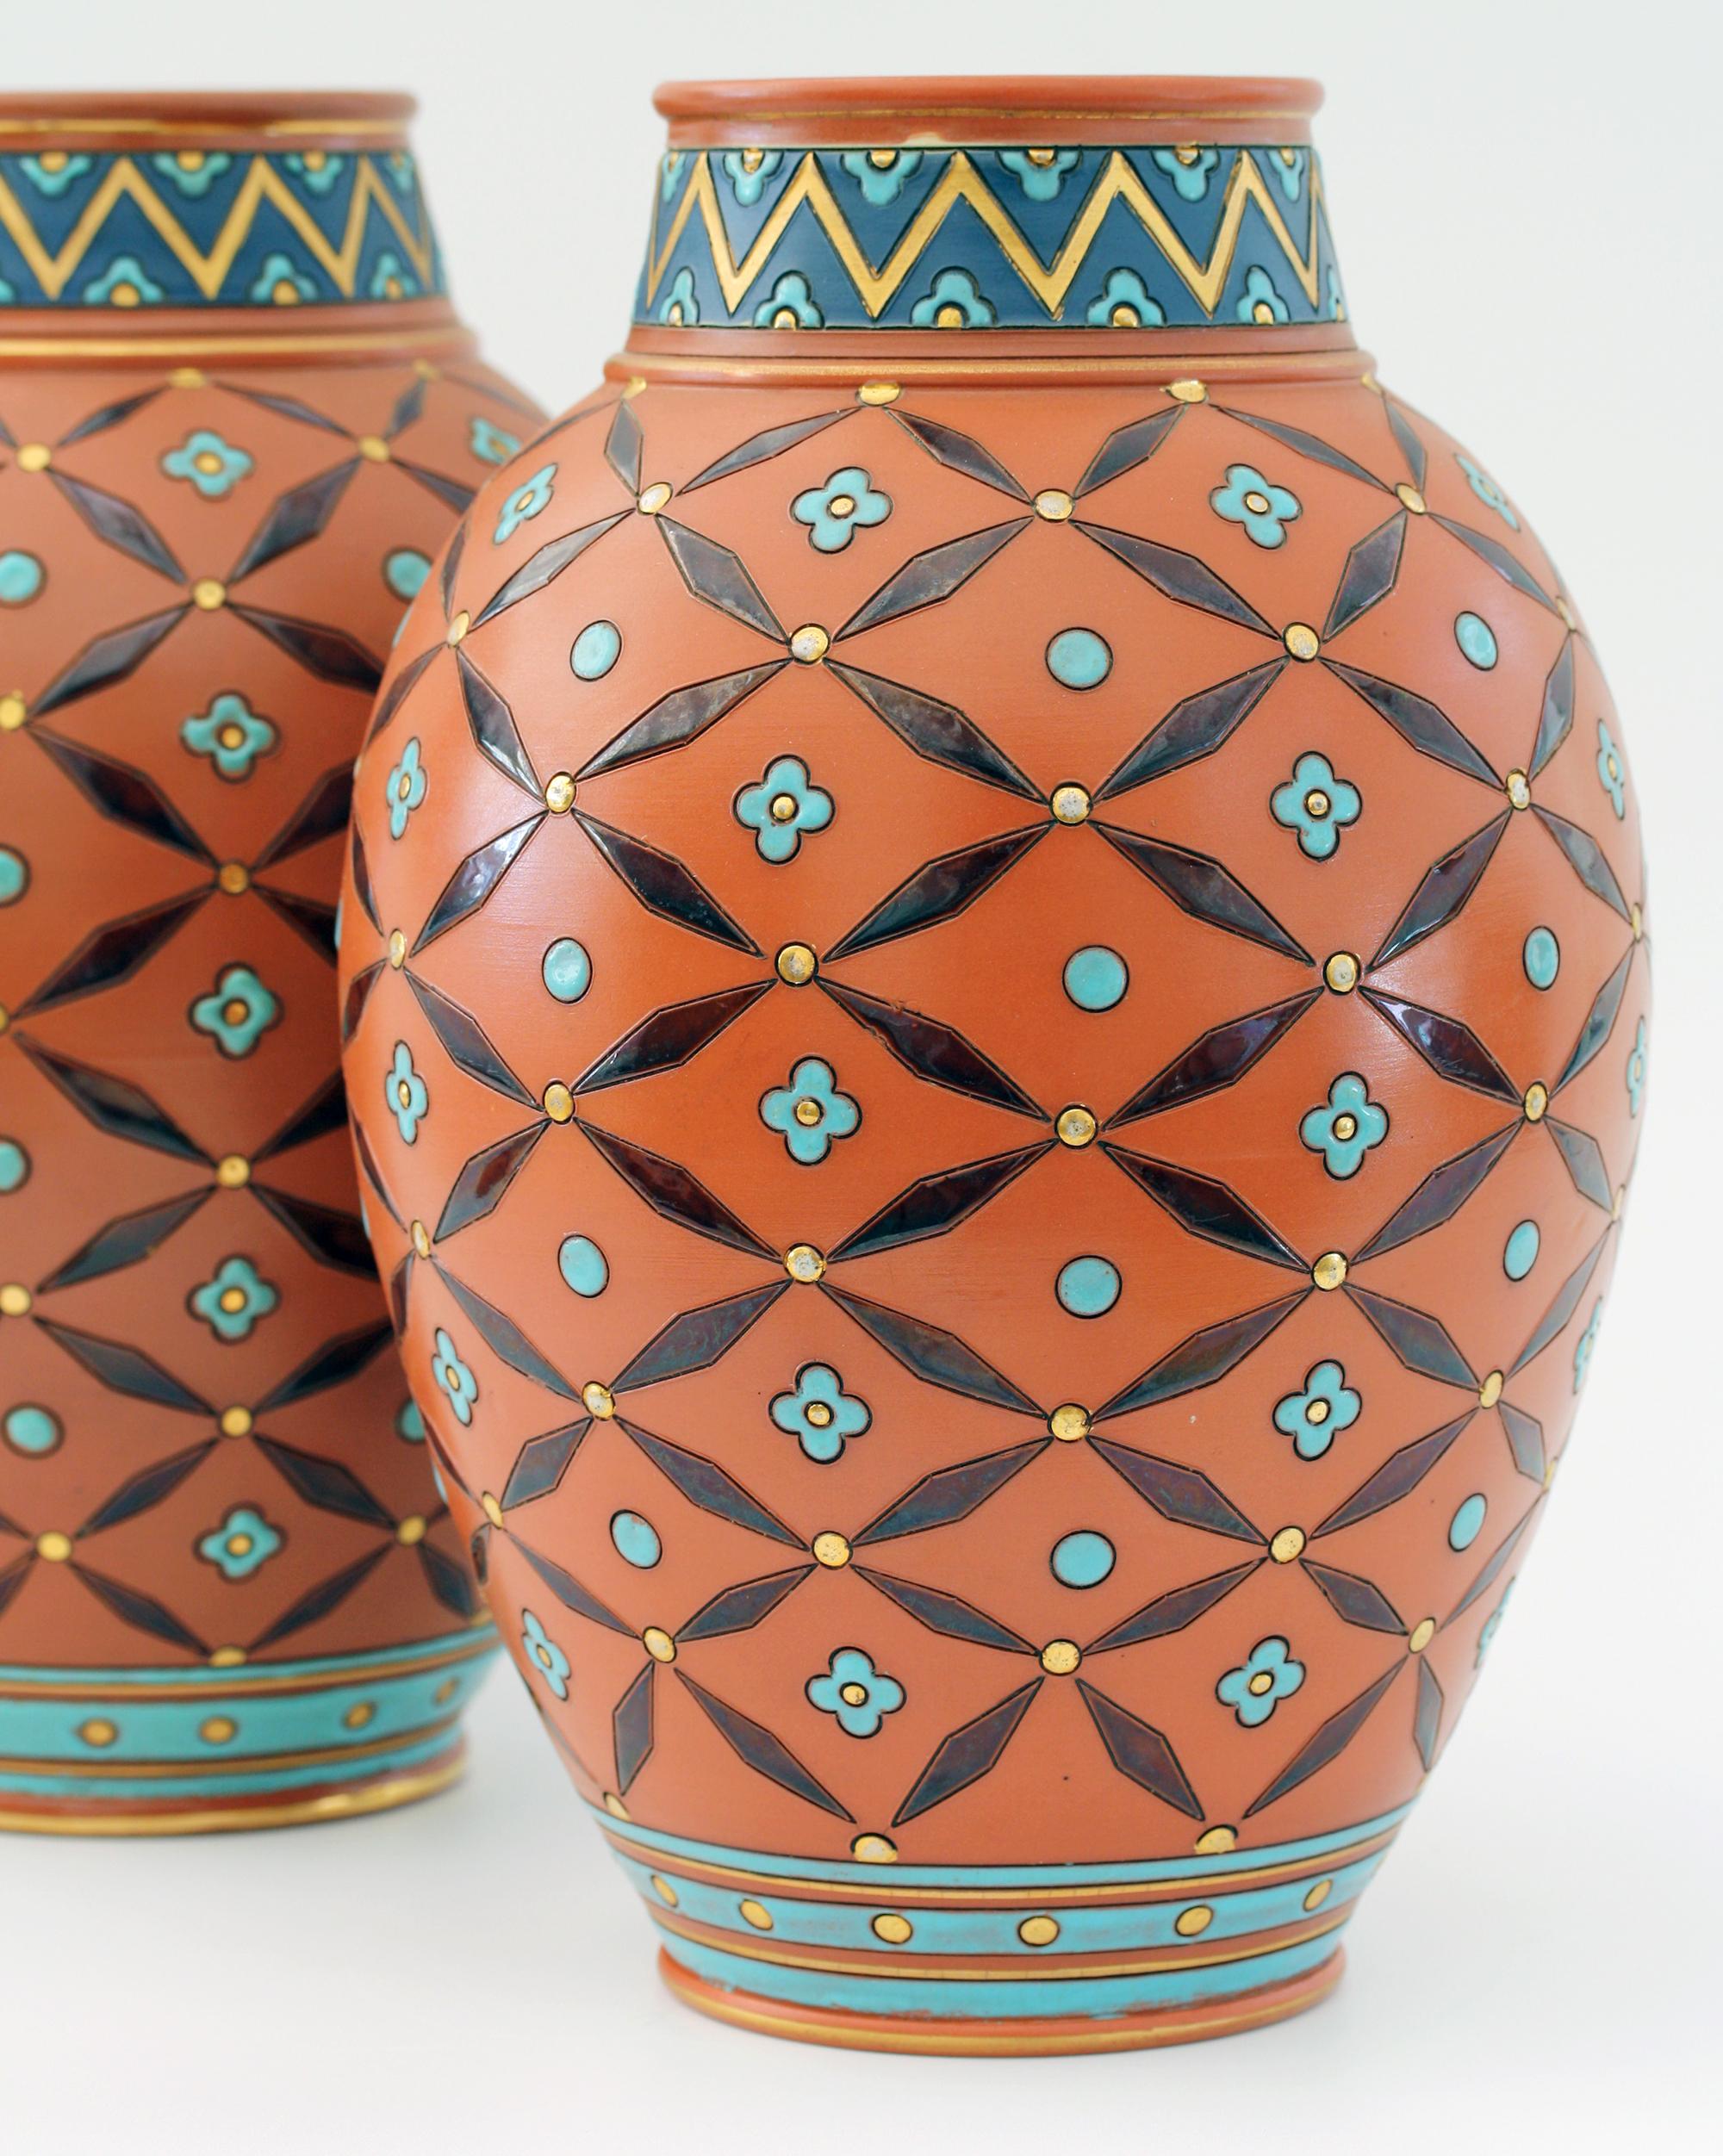 Hand-Crafted Hans Christiansen Pair of Villeroy & Boch Gothic Revival Vases, circa 1900